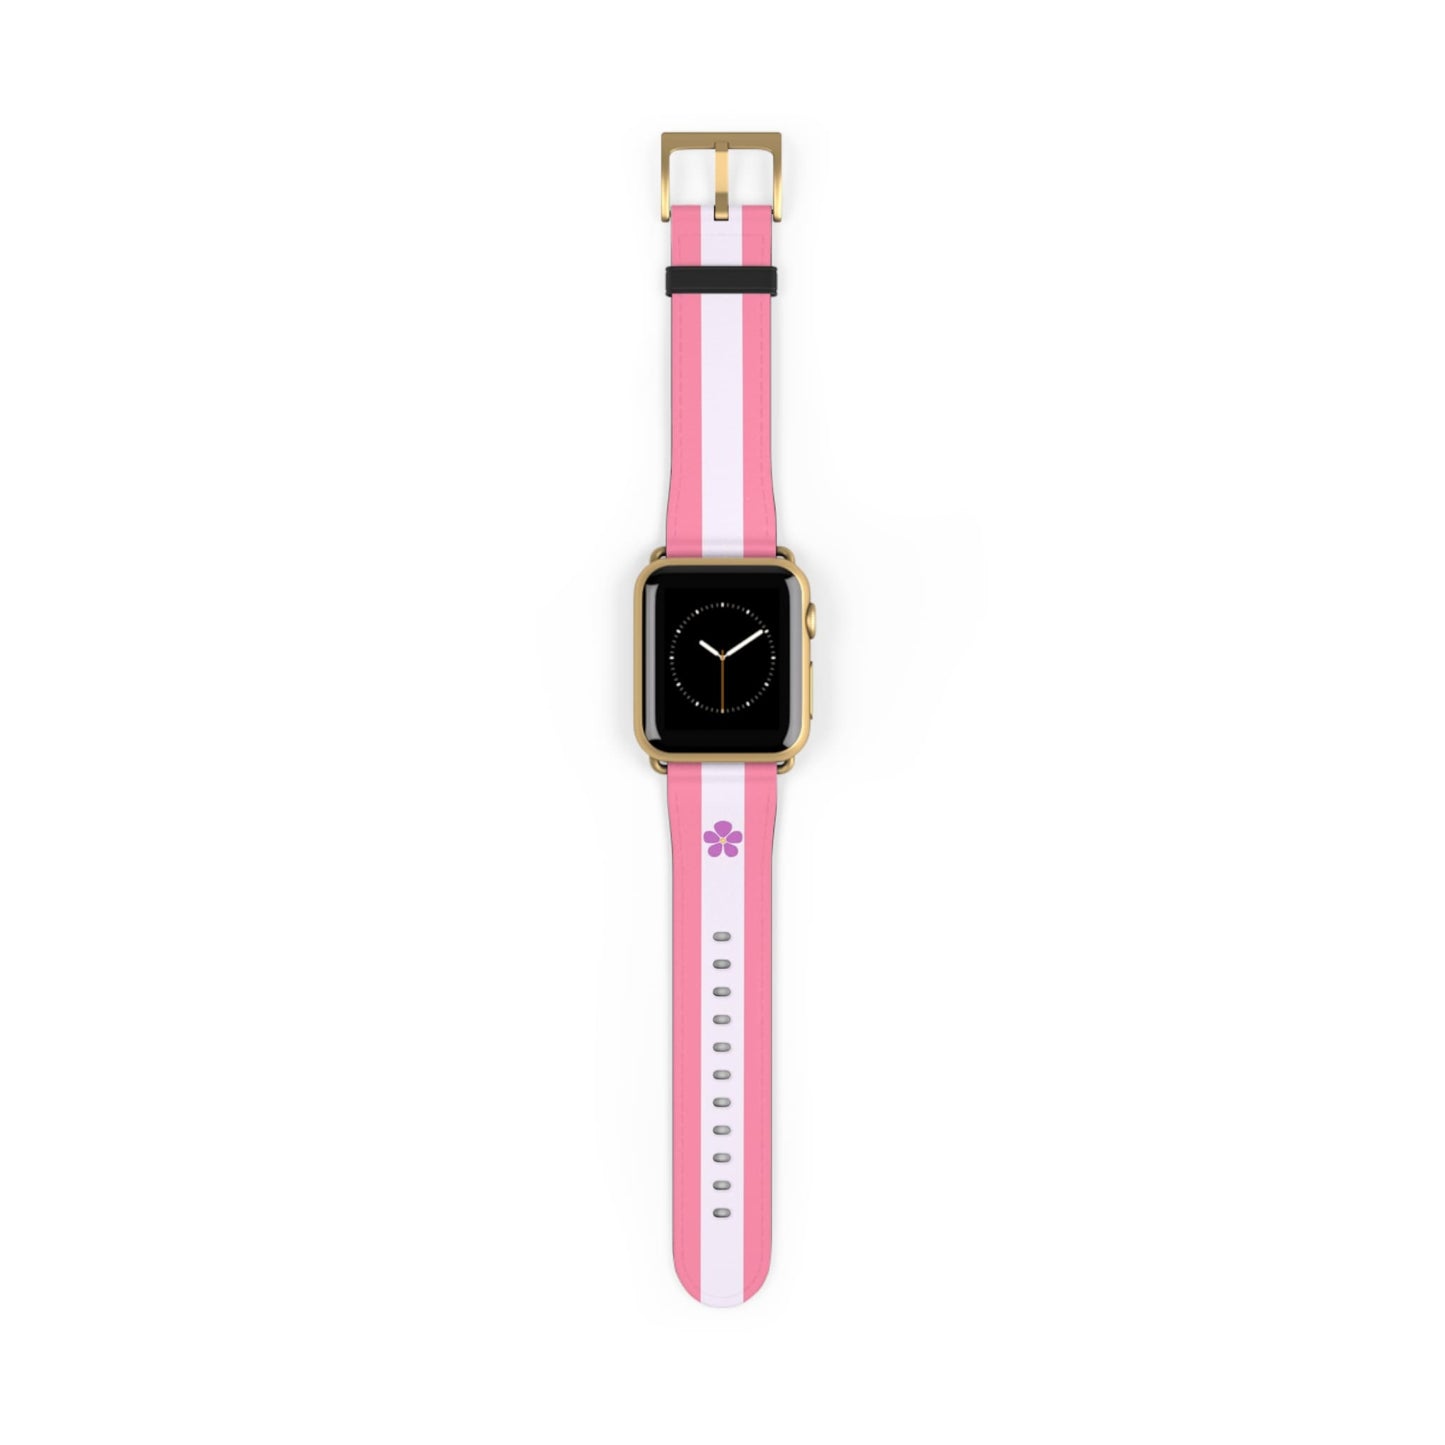 sapphic watch band for Apple iwatch, gold